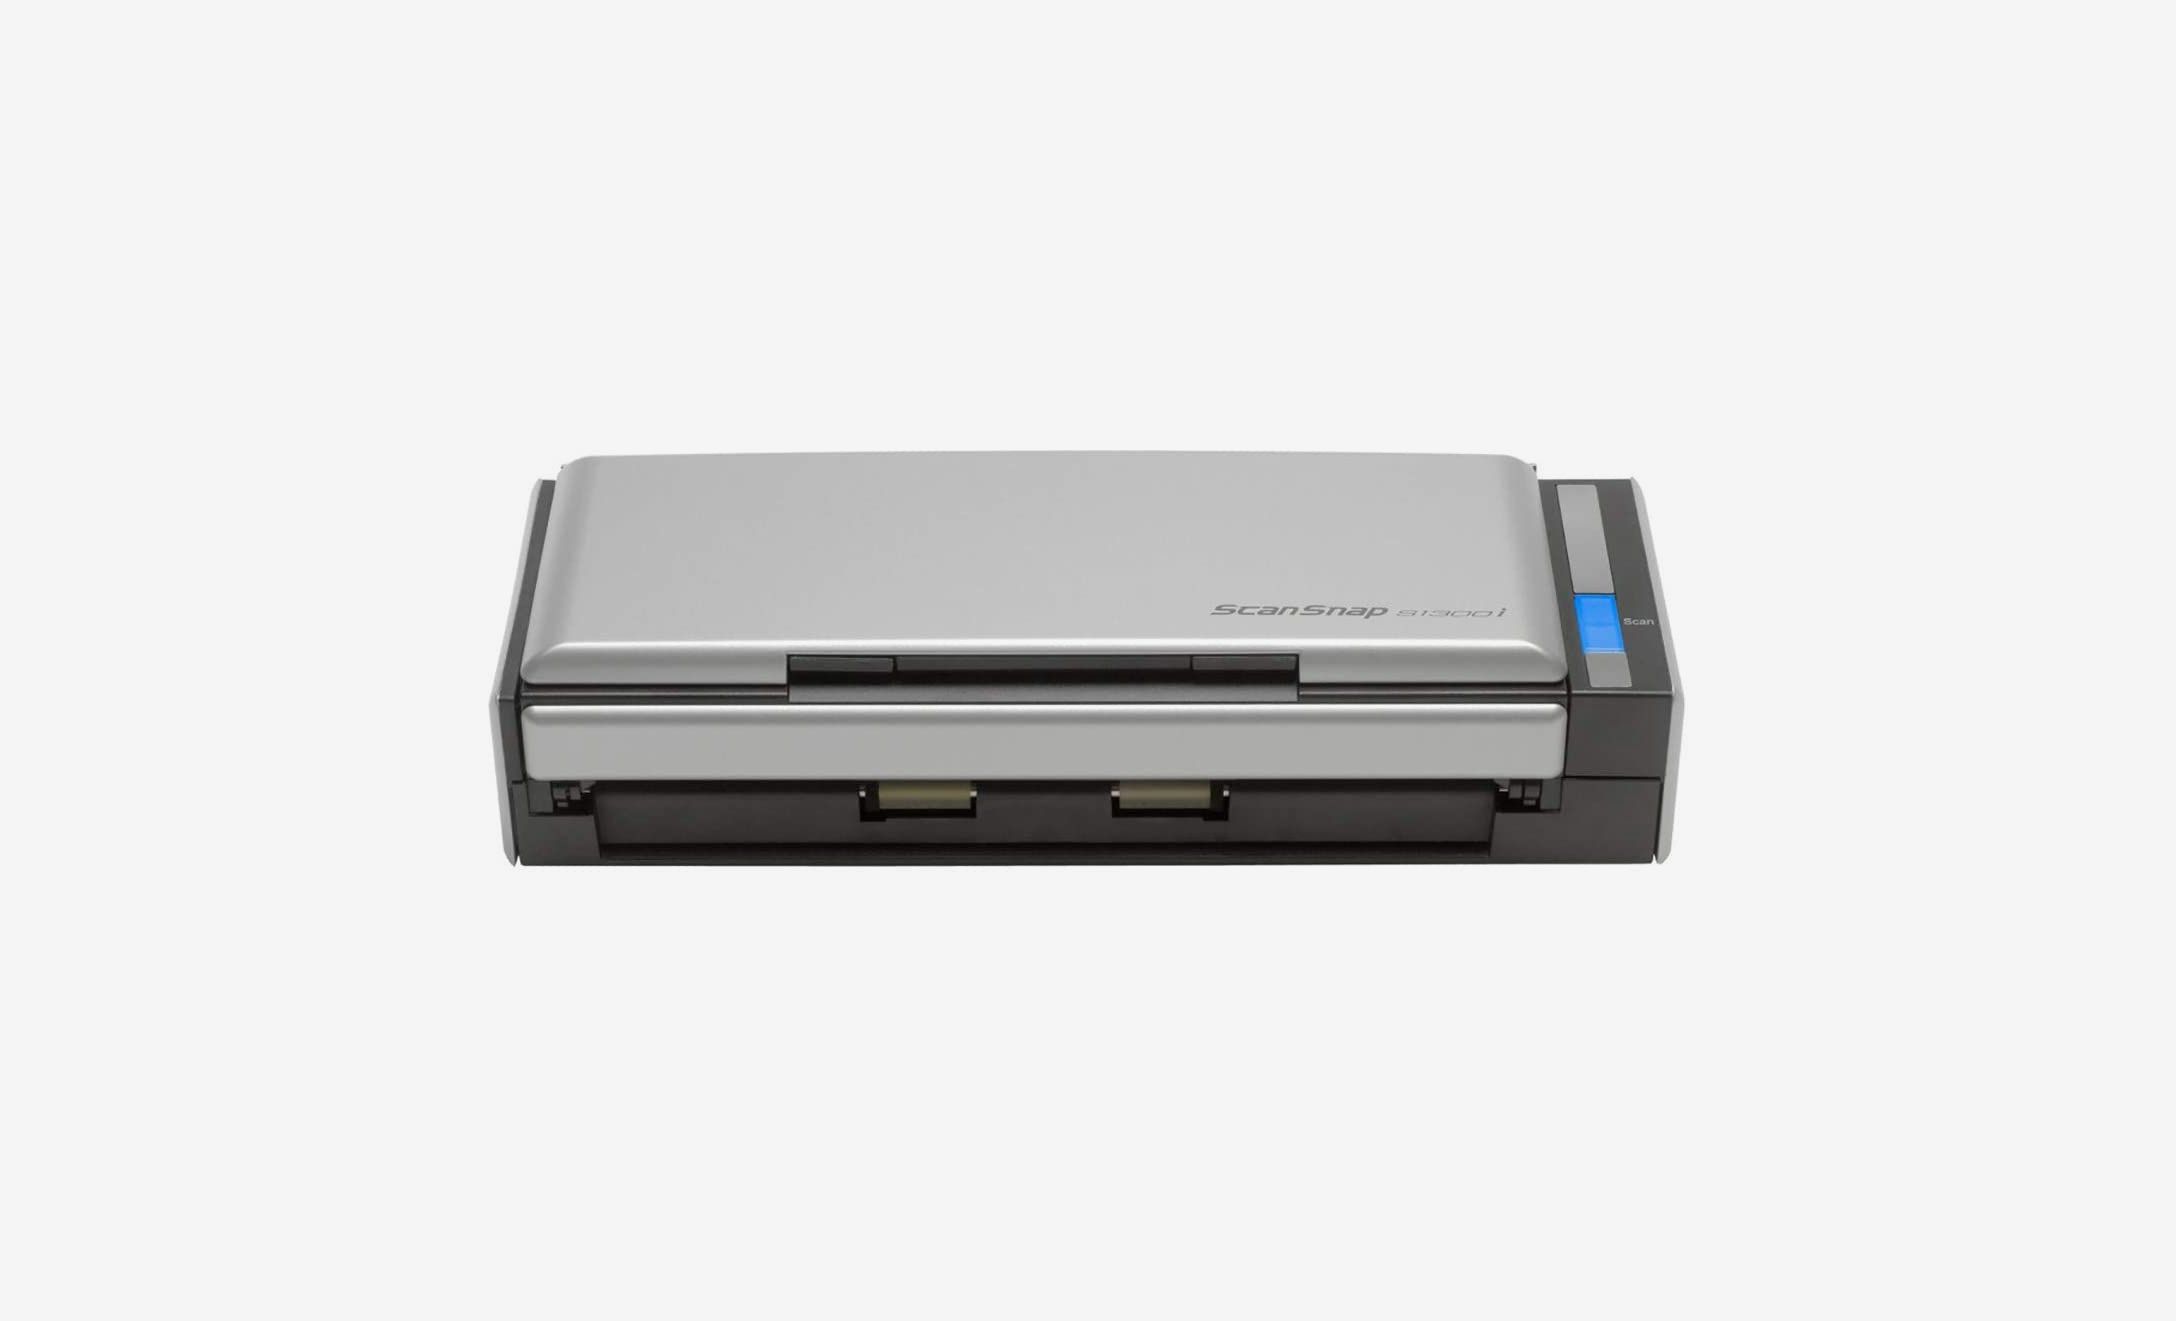 fast photo scanner reviews